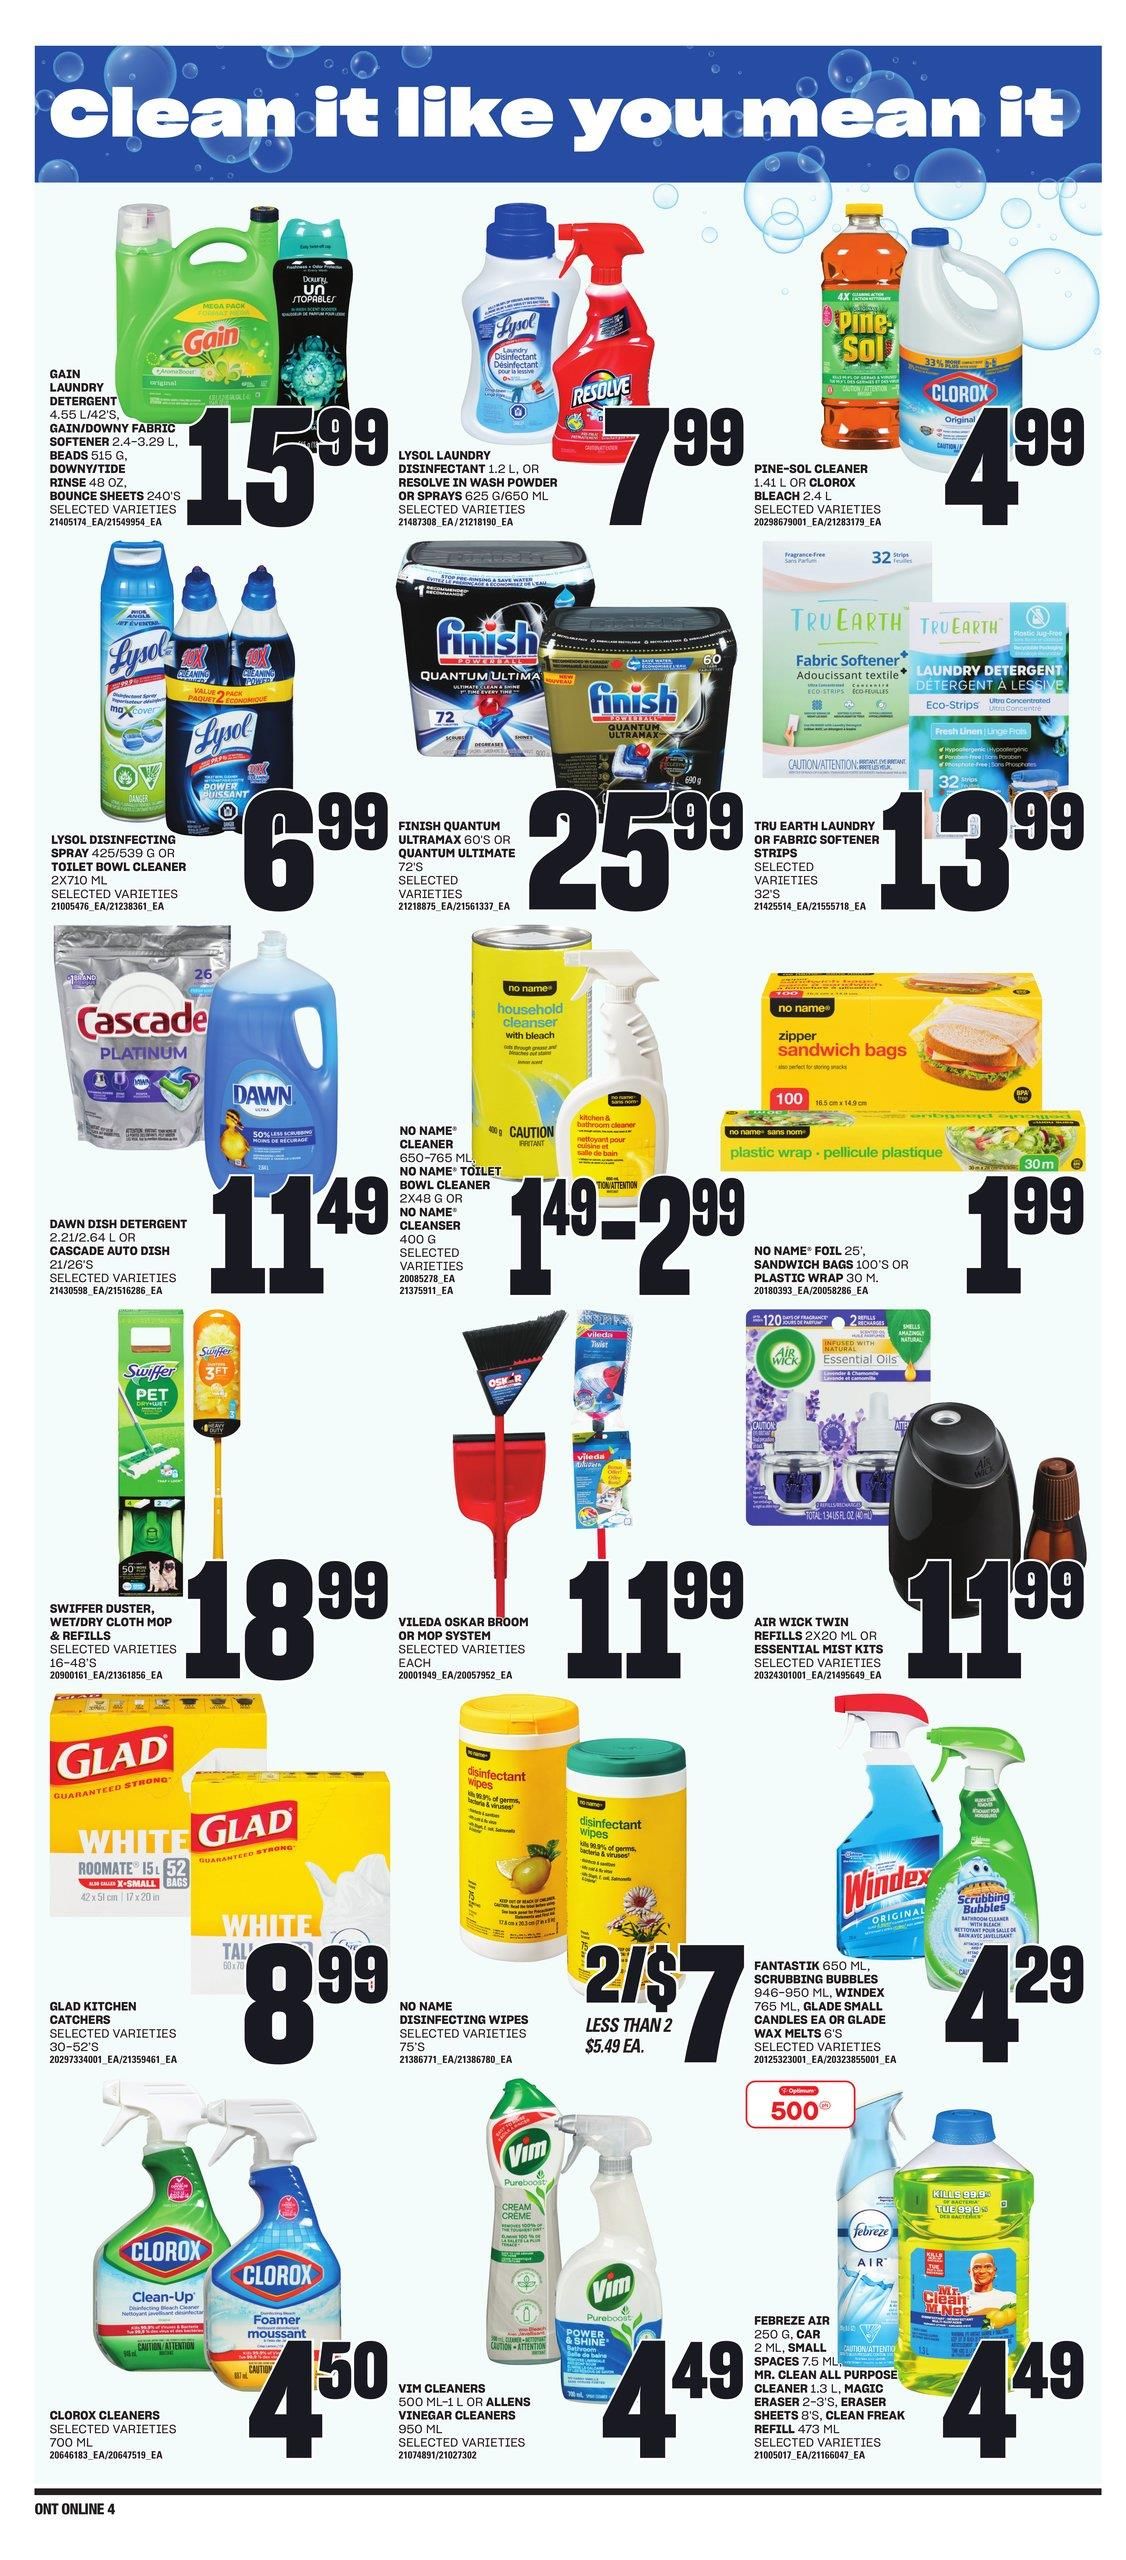 Zehrs - Weekly Flyer Specials - Page 10